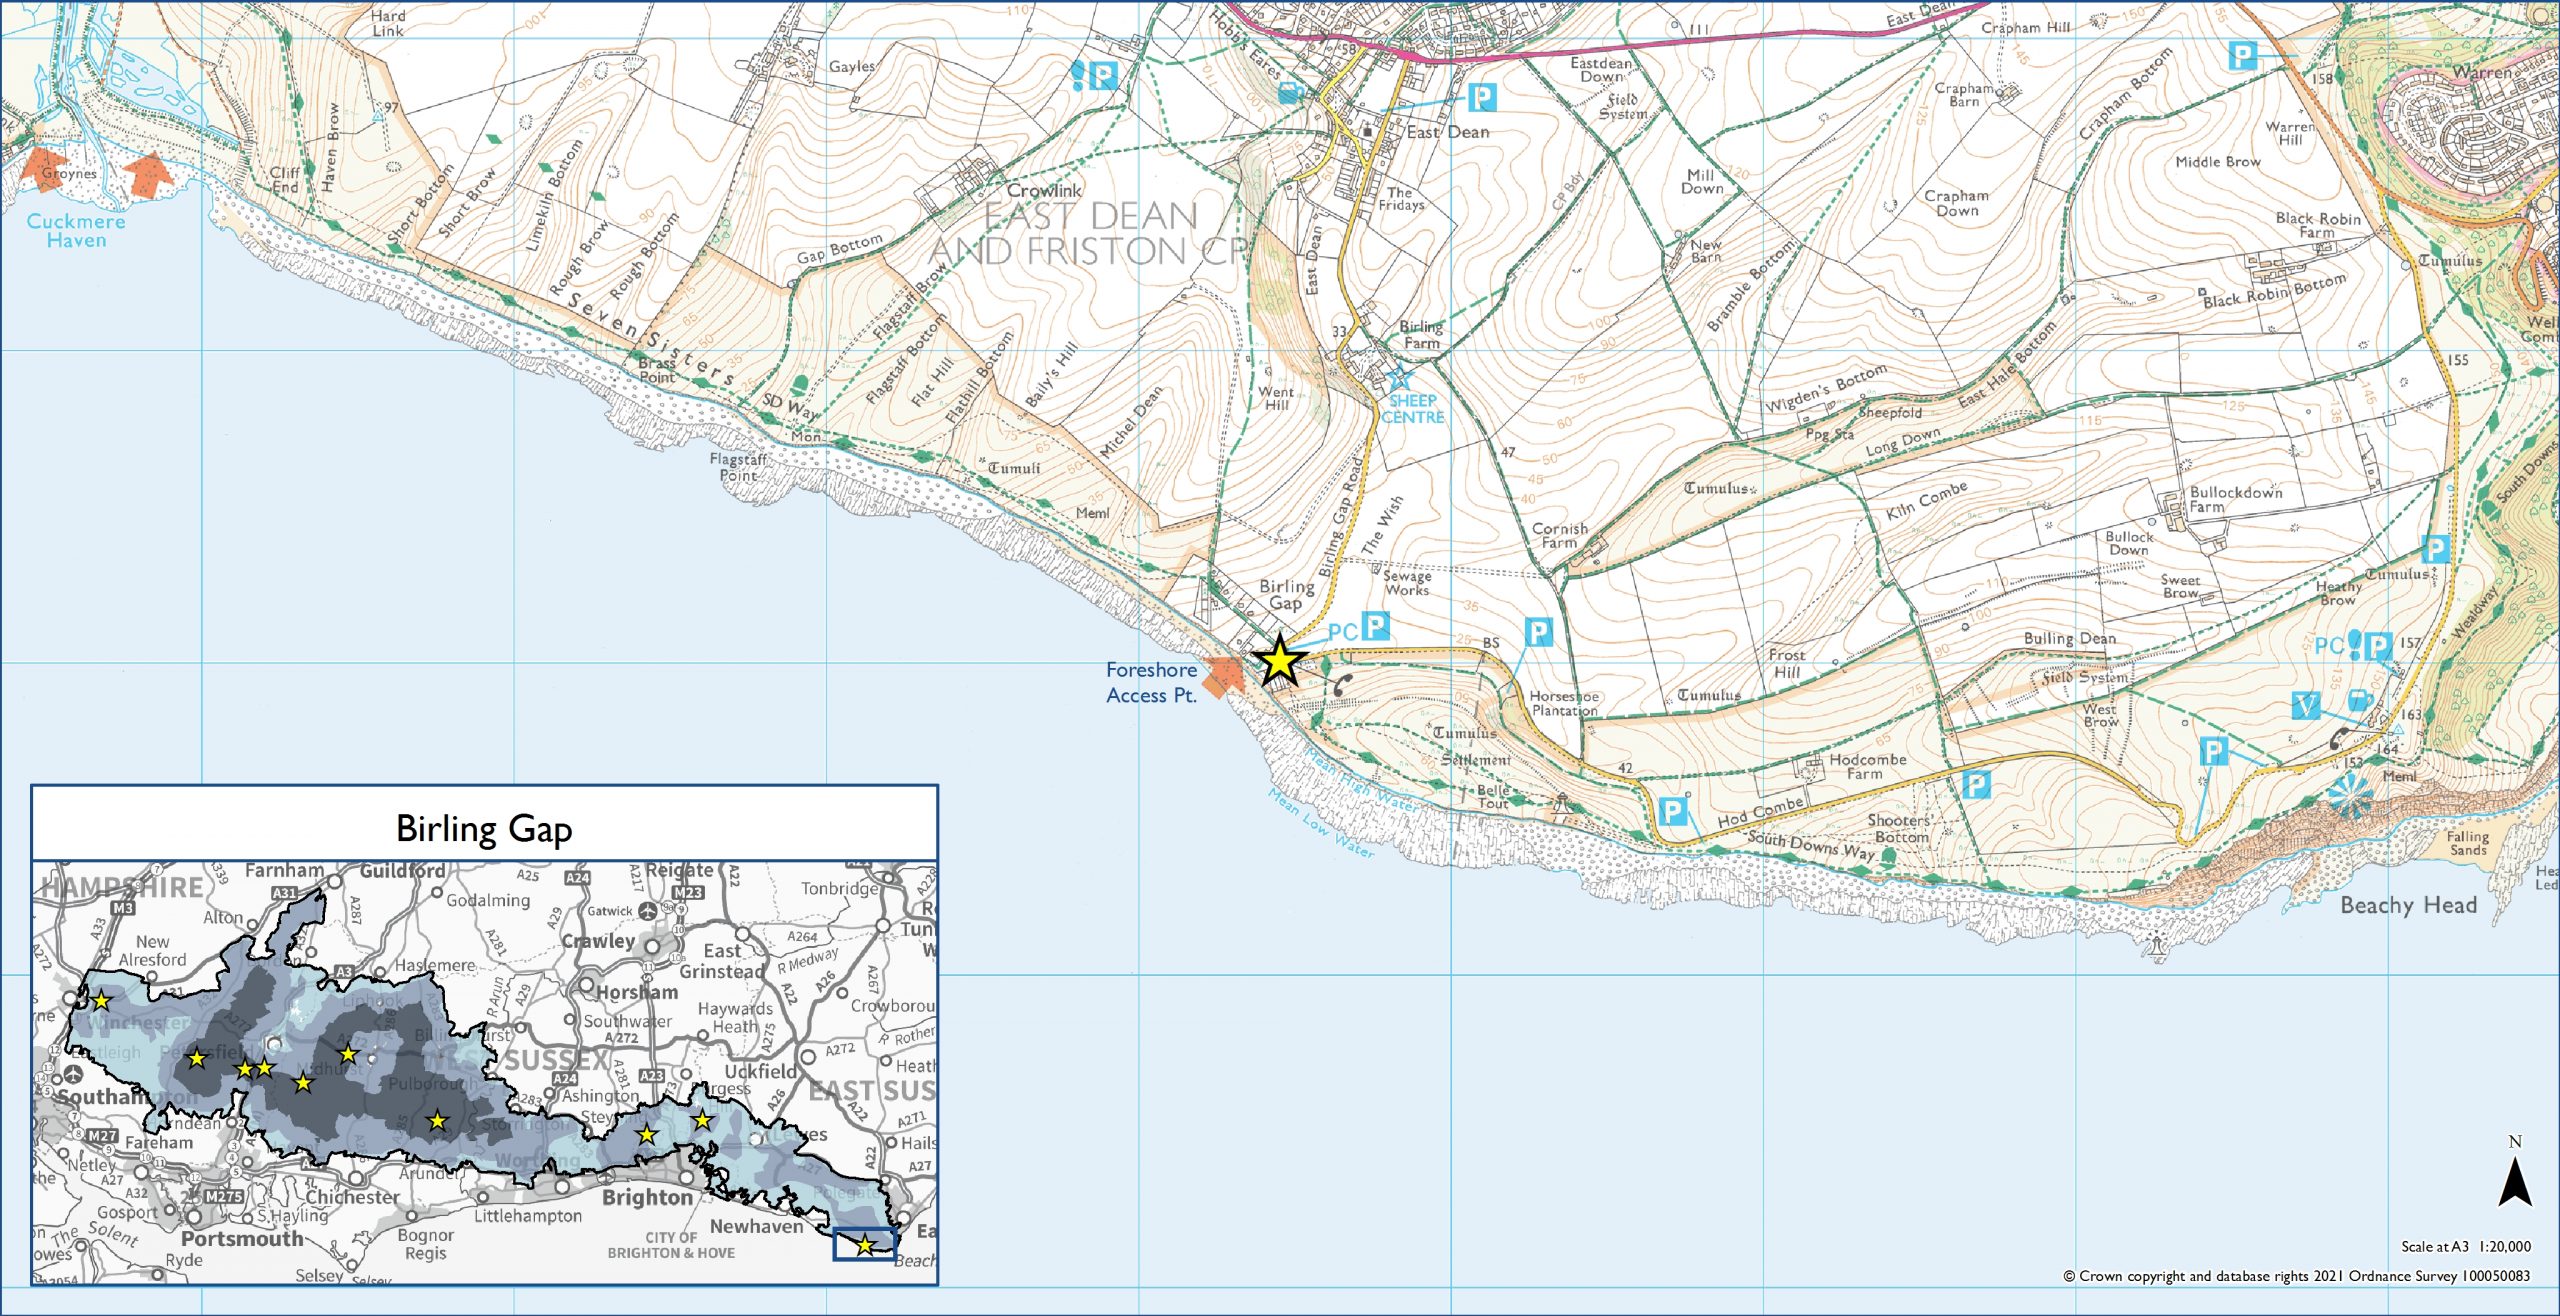 OS Map showing the location of Birling Gap Dark Sky Discovery site